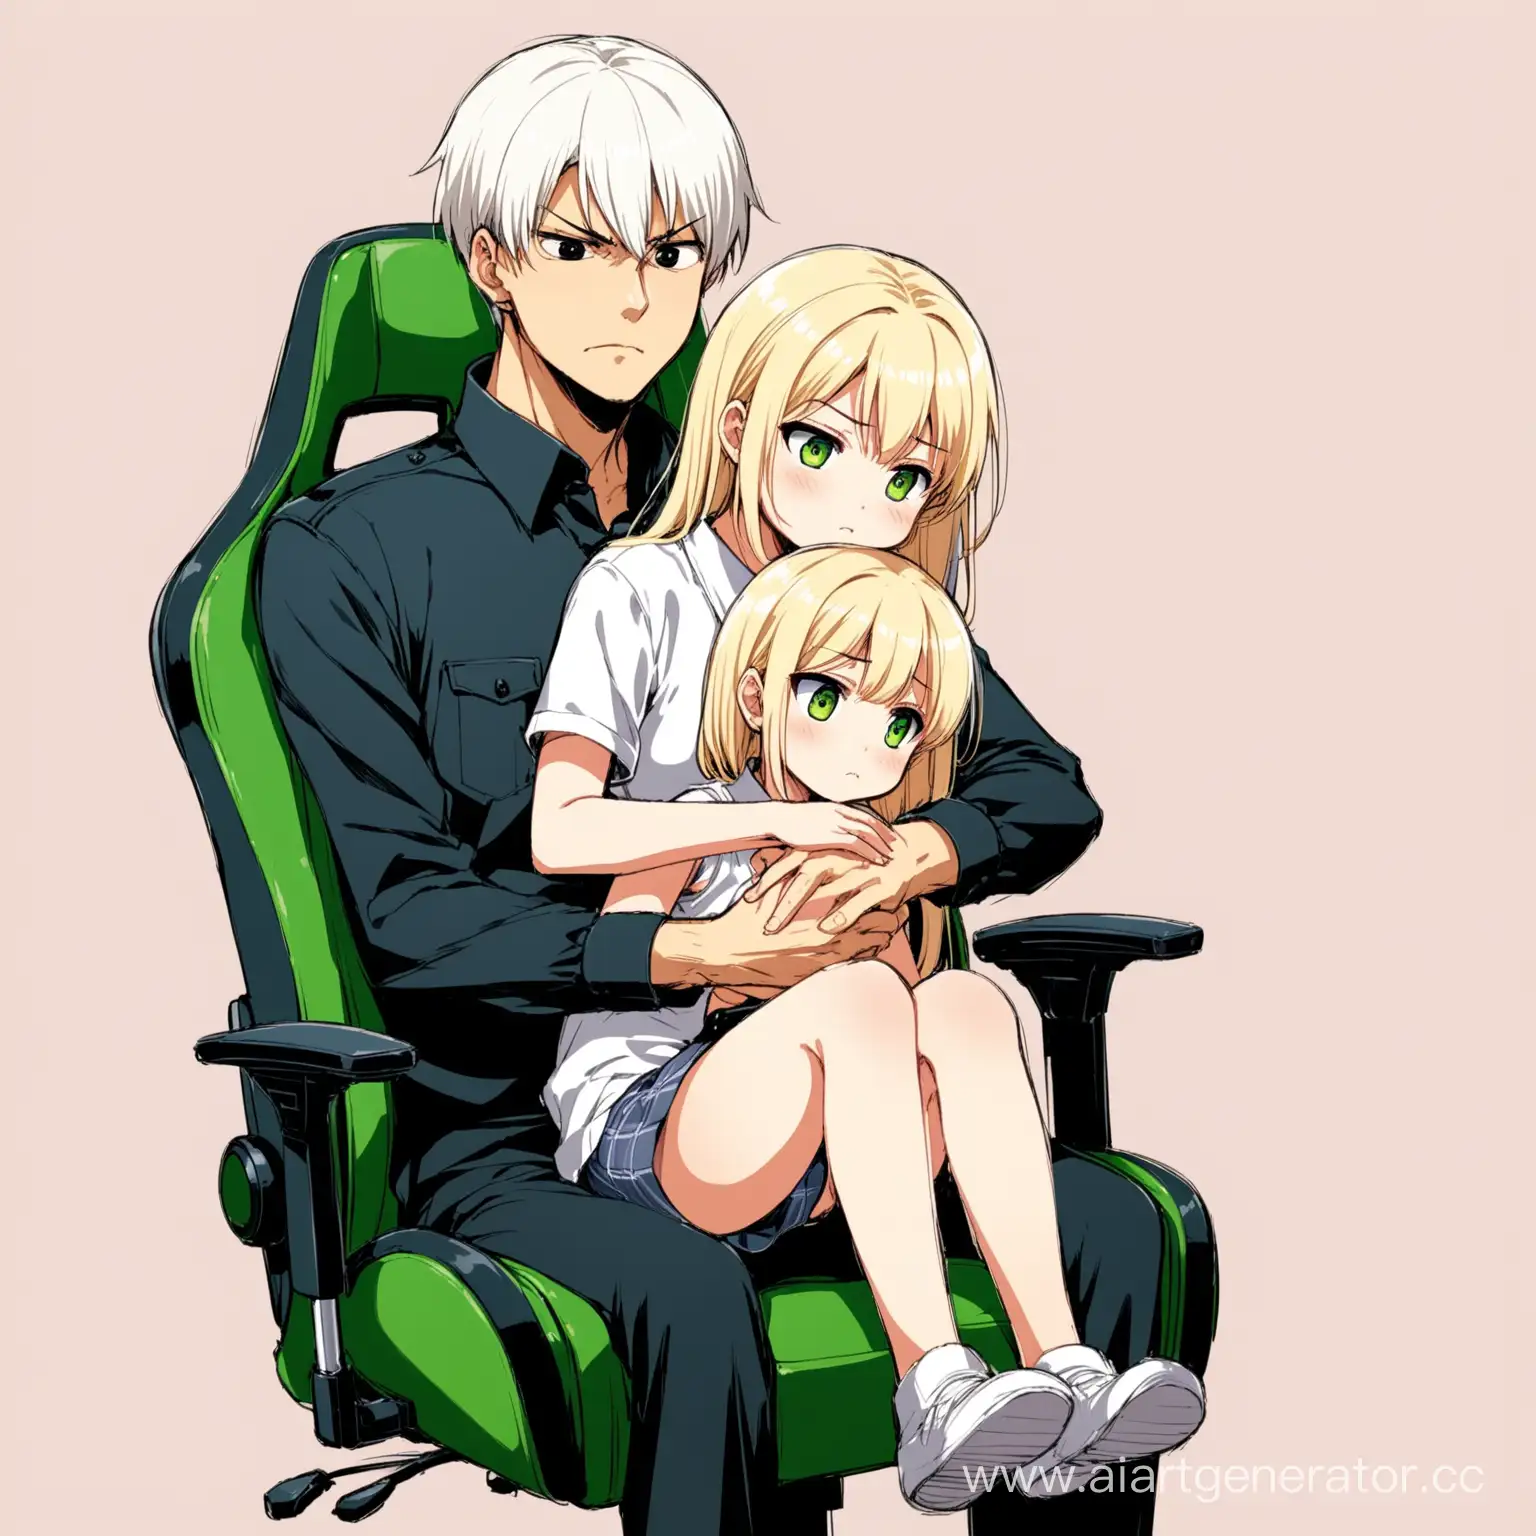 Unhappy-Gamer-Boy-with-Embarrassed-Anime-Girl-on-Lap-Playing-Shooter-Game